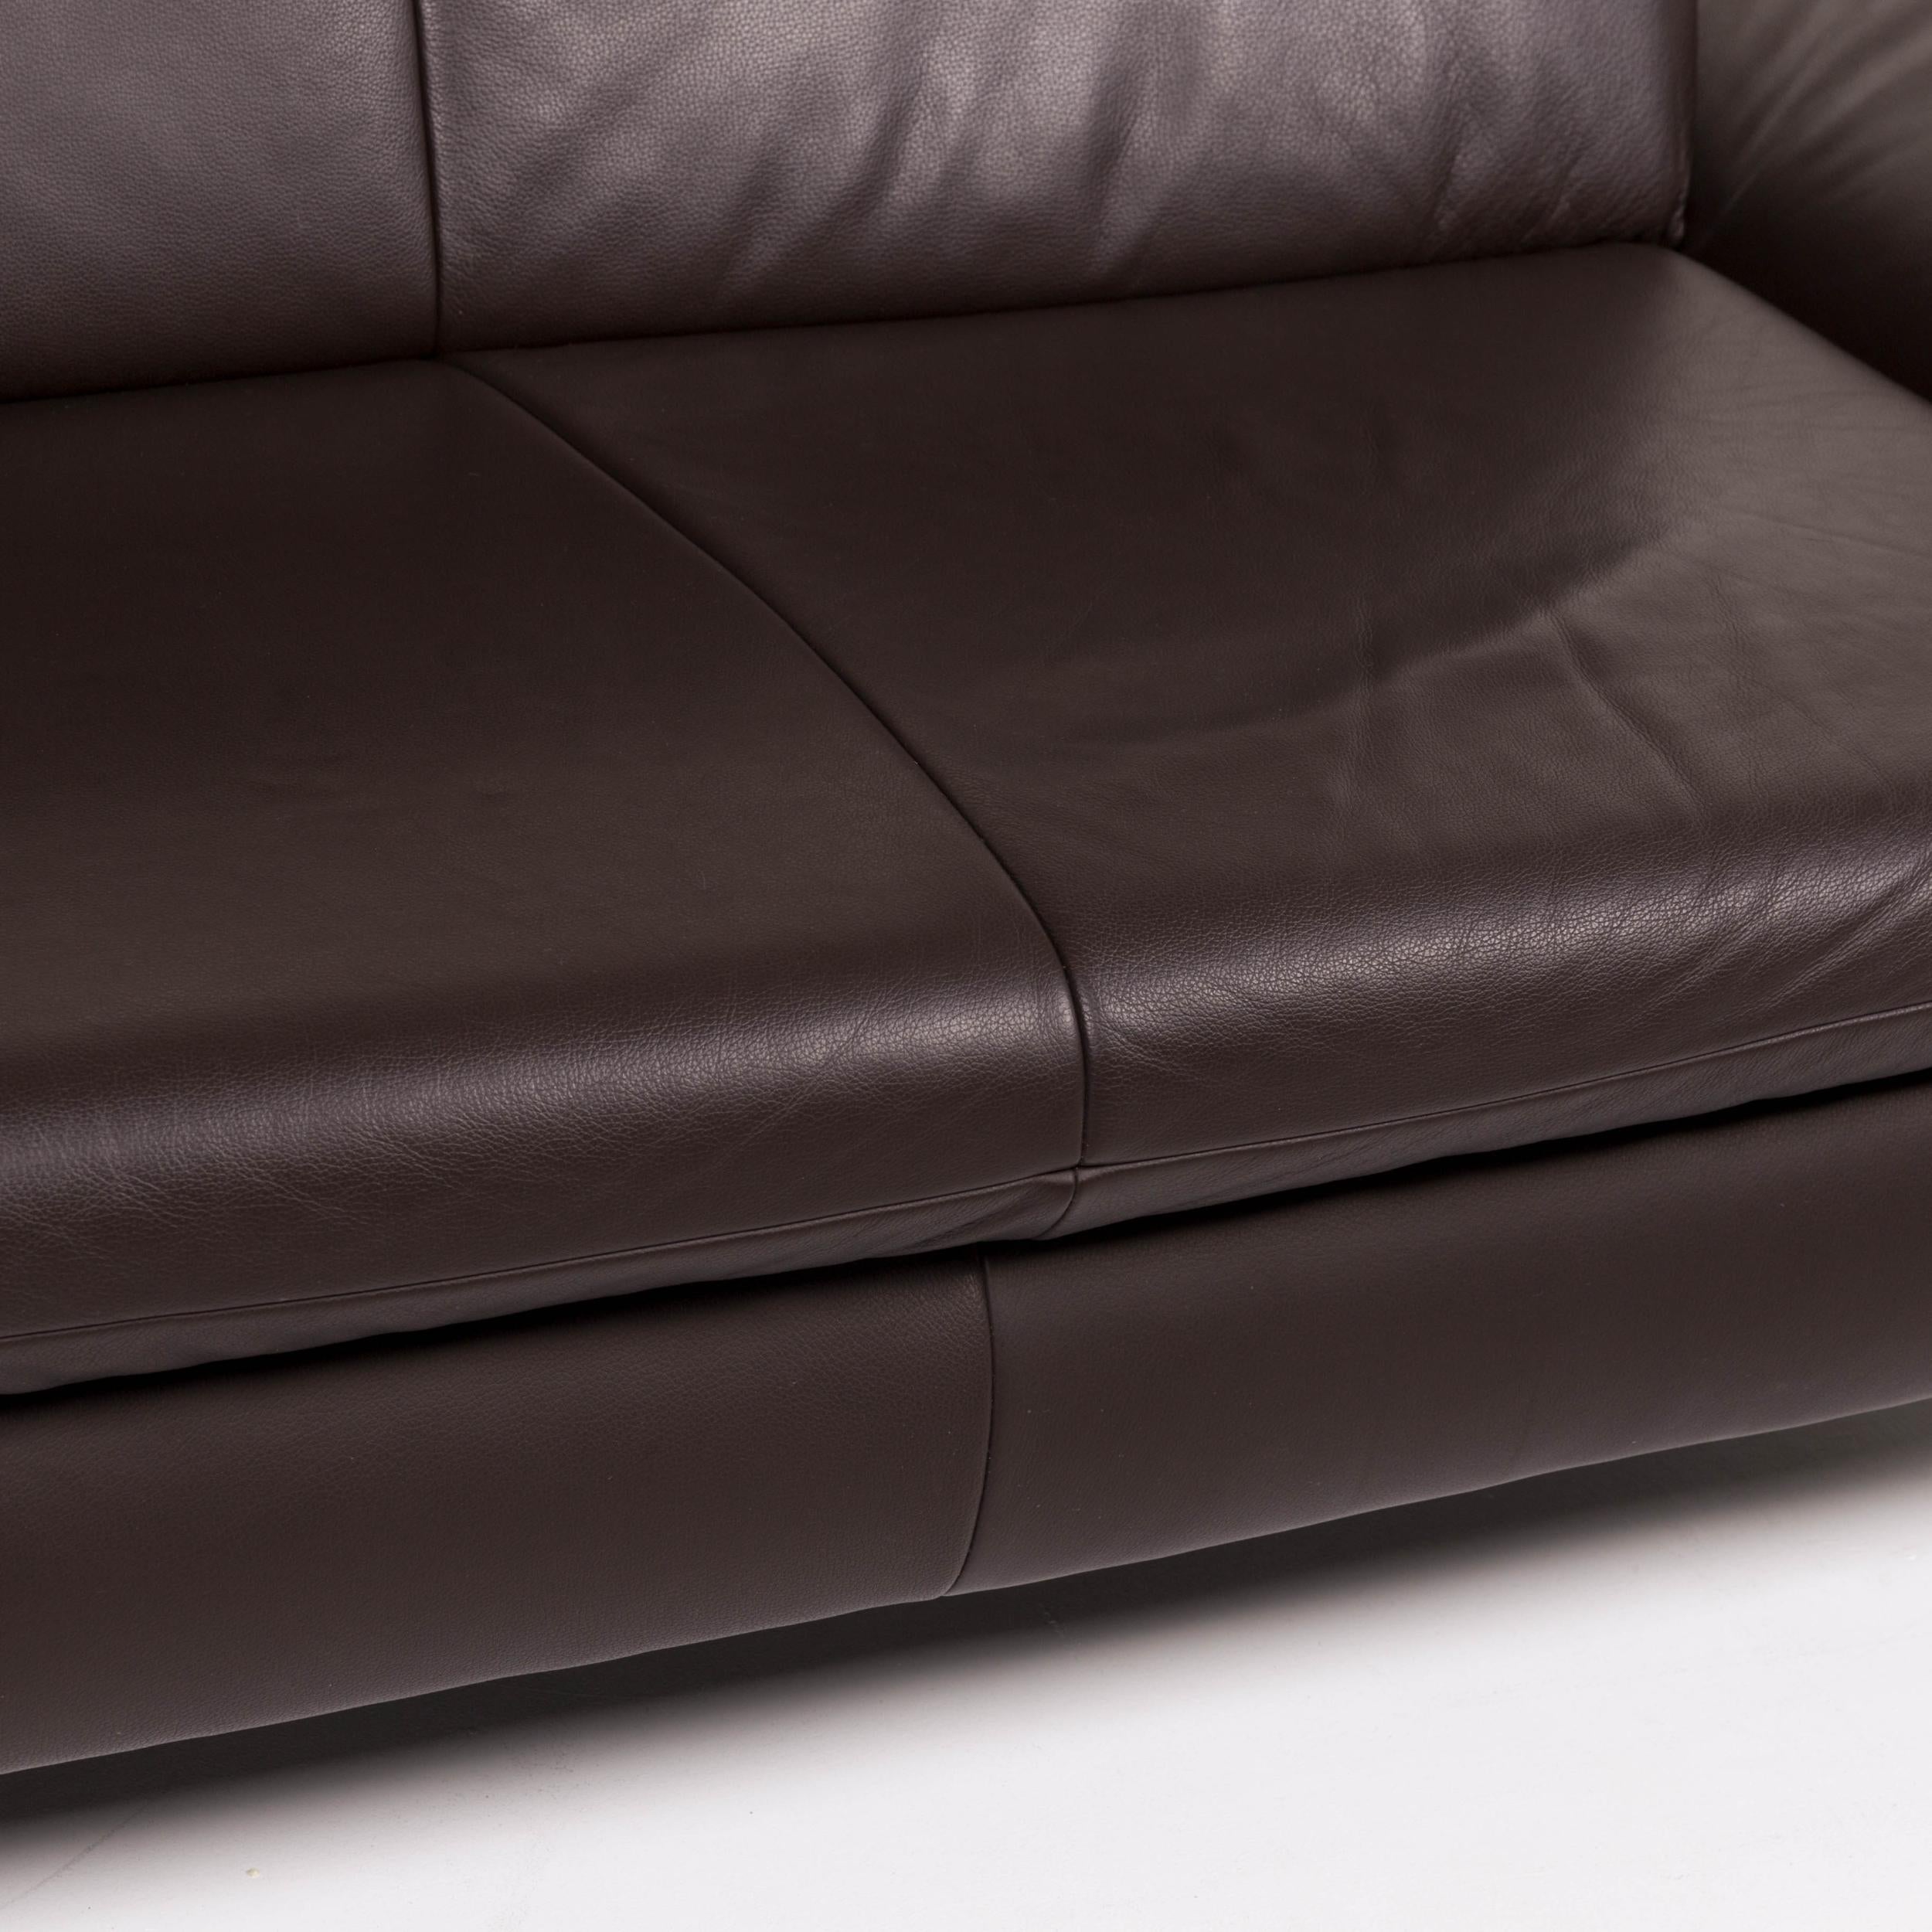 We bring to you a Koinor Rossini brown leather sofa two-seat with function.
 
 

 Product measurements in centimeters:
 

Depth: 86
Width: 190
Height: 83
Seat-height: 40
Rest-height: 40
Seat-depth: 55
Seat-width: 108
Back-height: 45.
 